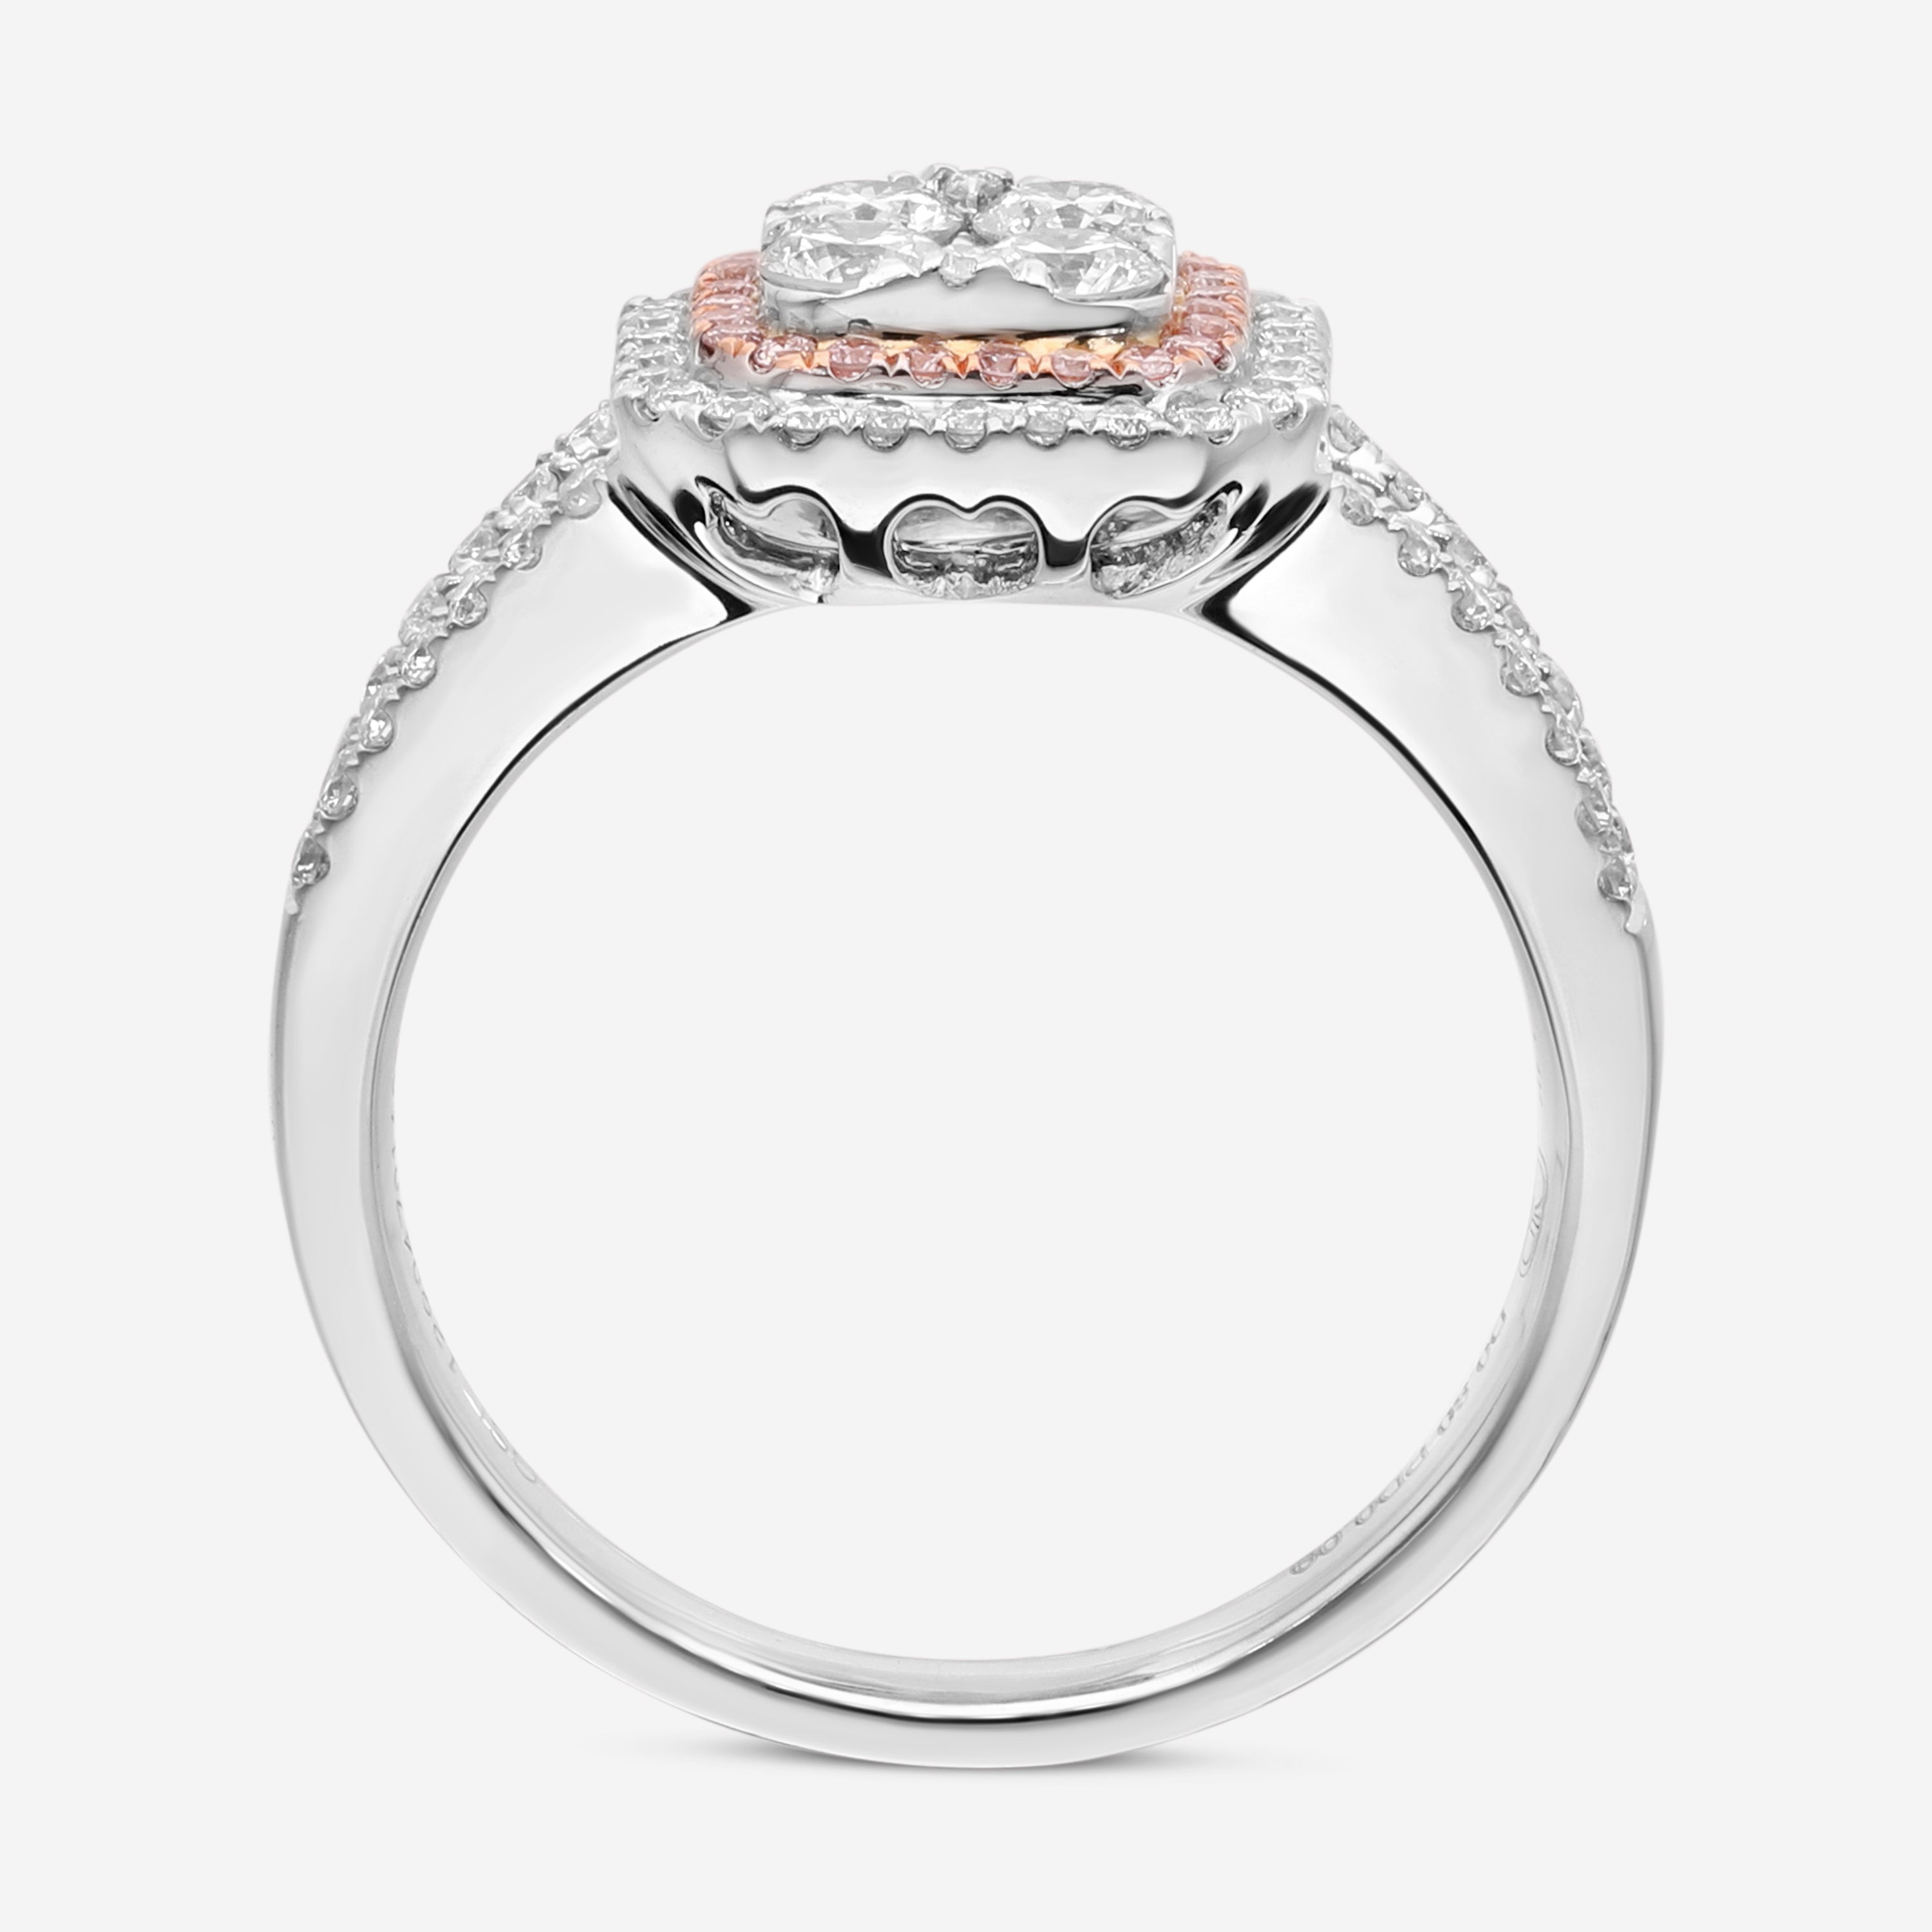 Gregg Ruth 14K Gold, White Diamond 0.80ct. tw. and Pink Diamond Engagement Ring Sz. 6.75 45164 - THE SOLIST